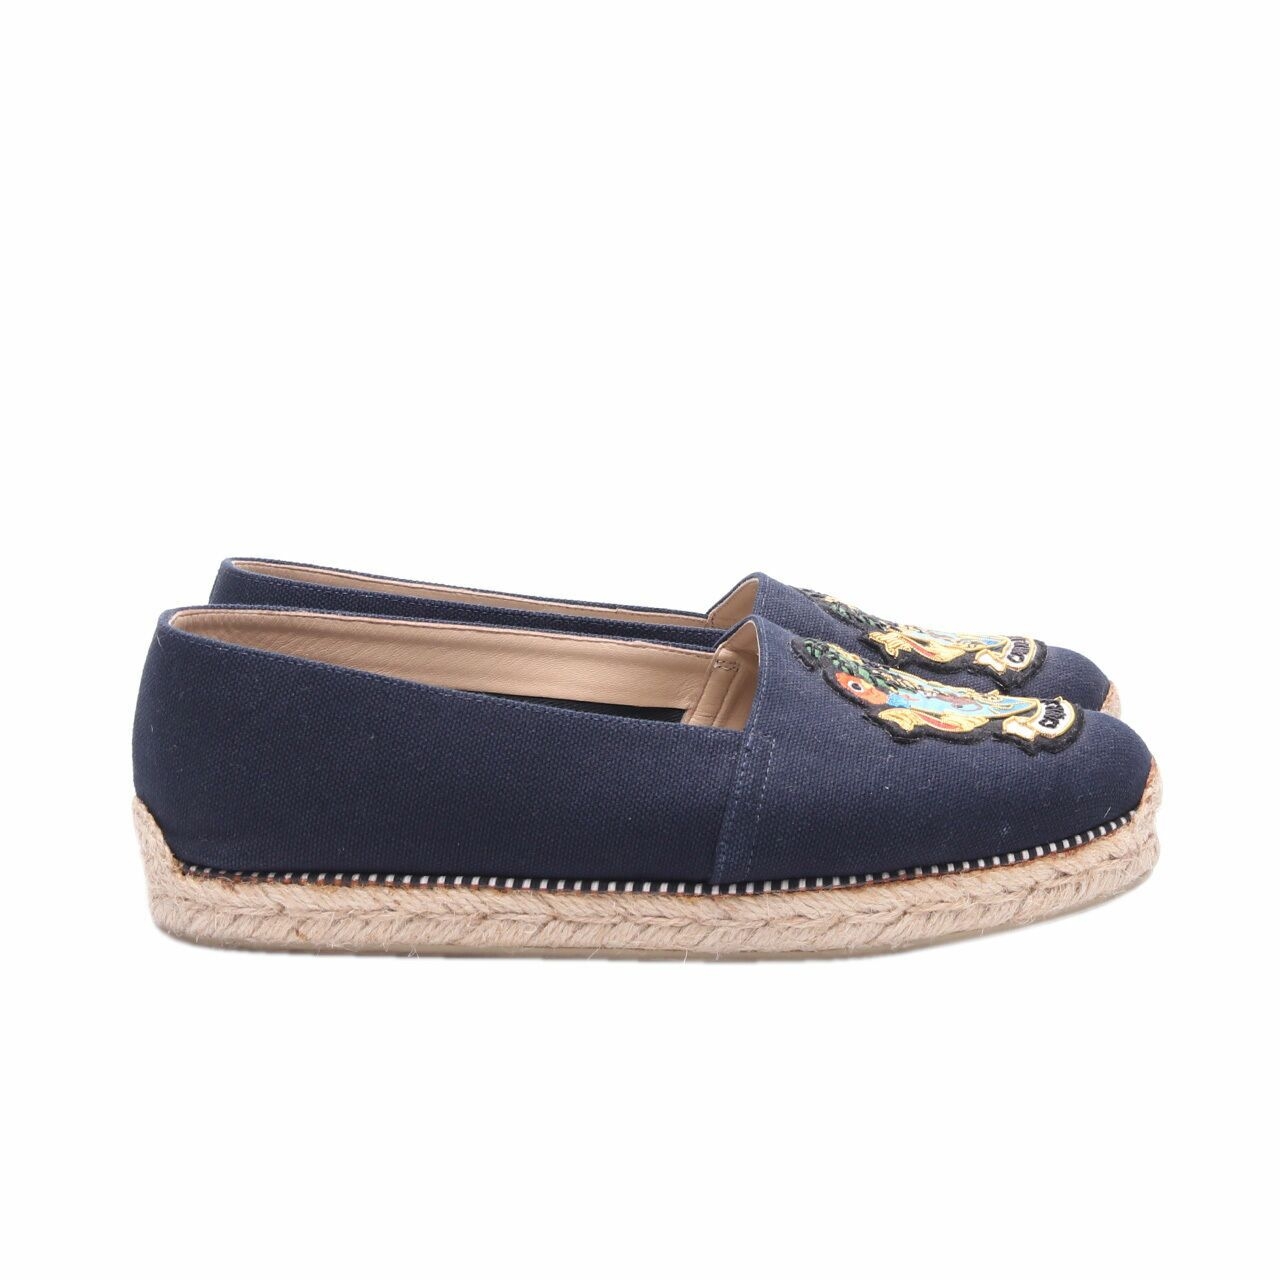 Christian Louboutin Carlo Loubi Navy Embroidered Espadrilles Flats Shoes